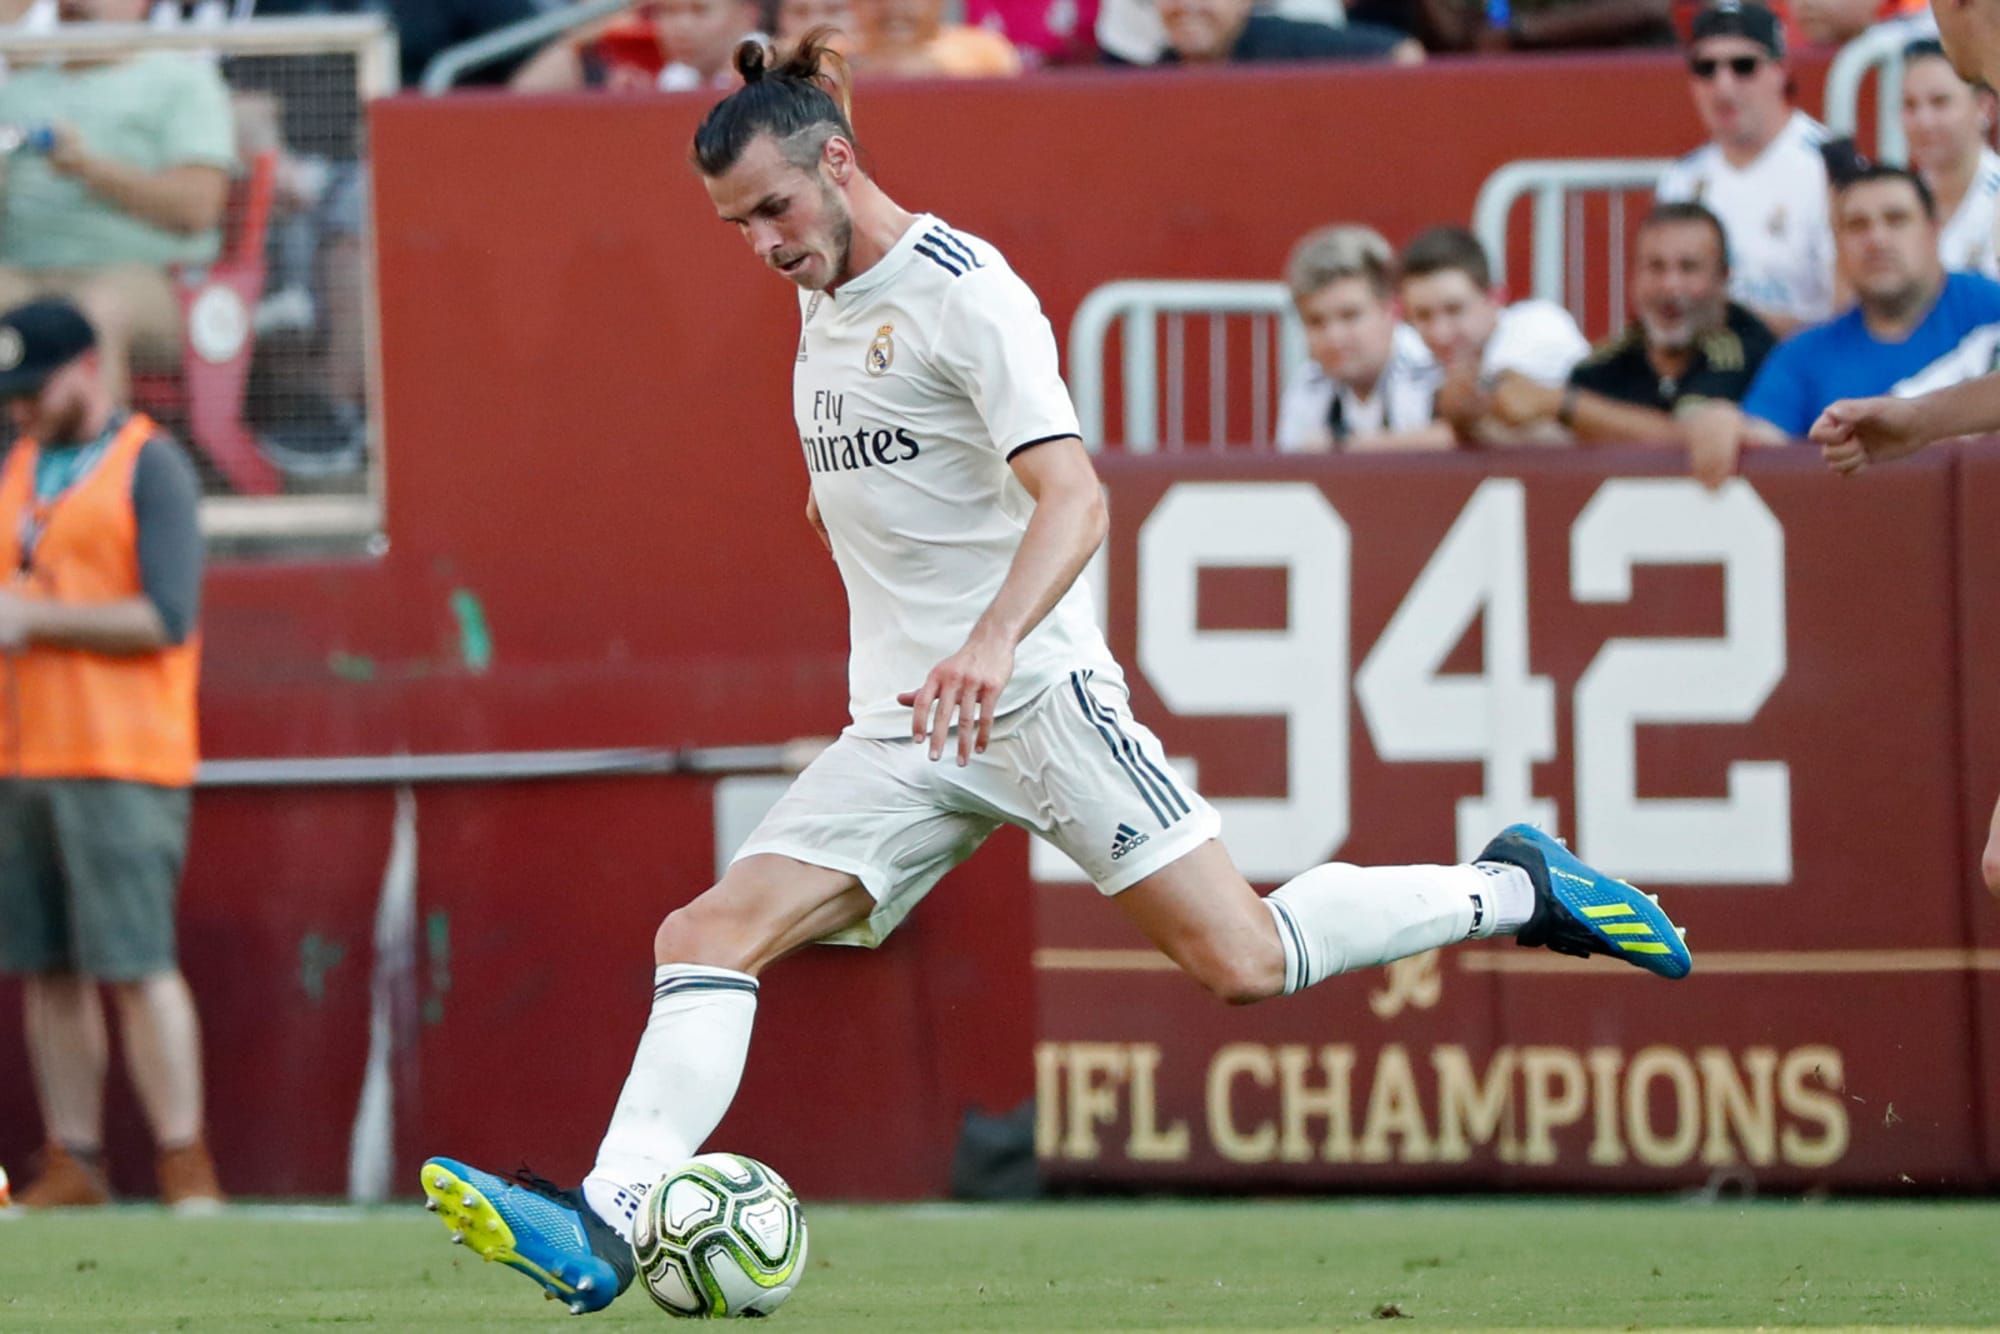 Photo of Gareth Bale joining LAFC in stunning move: Soccer fans left in shock